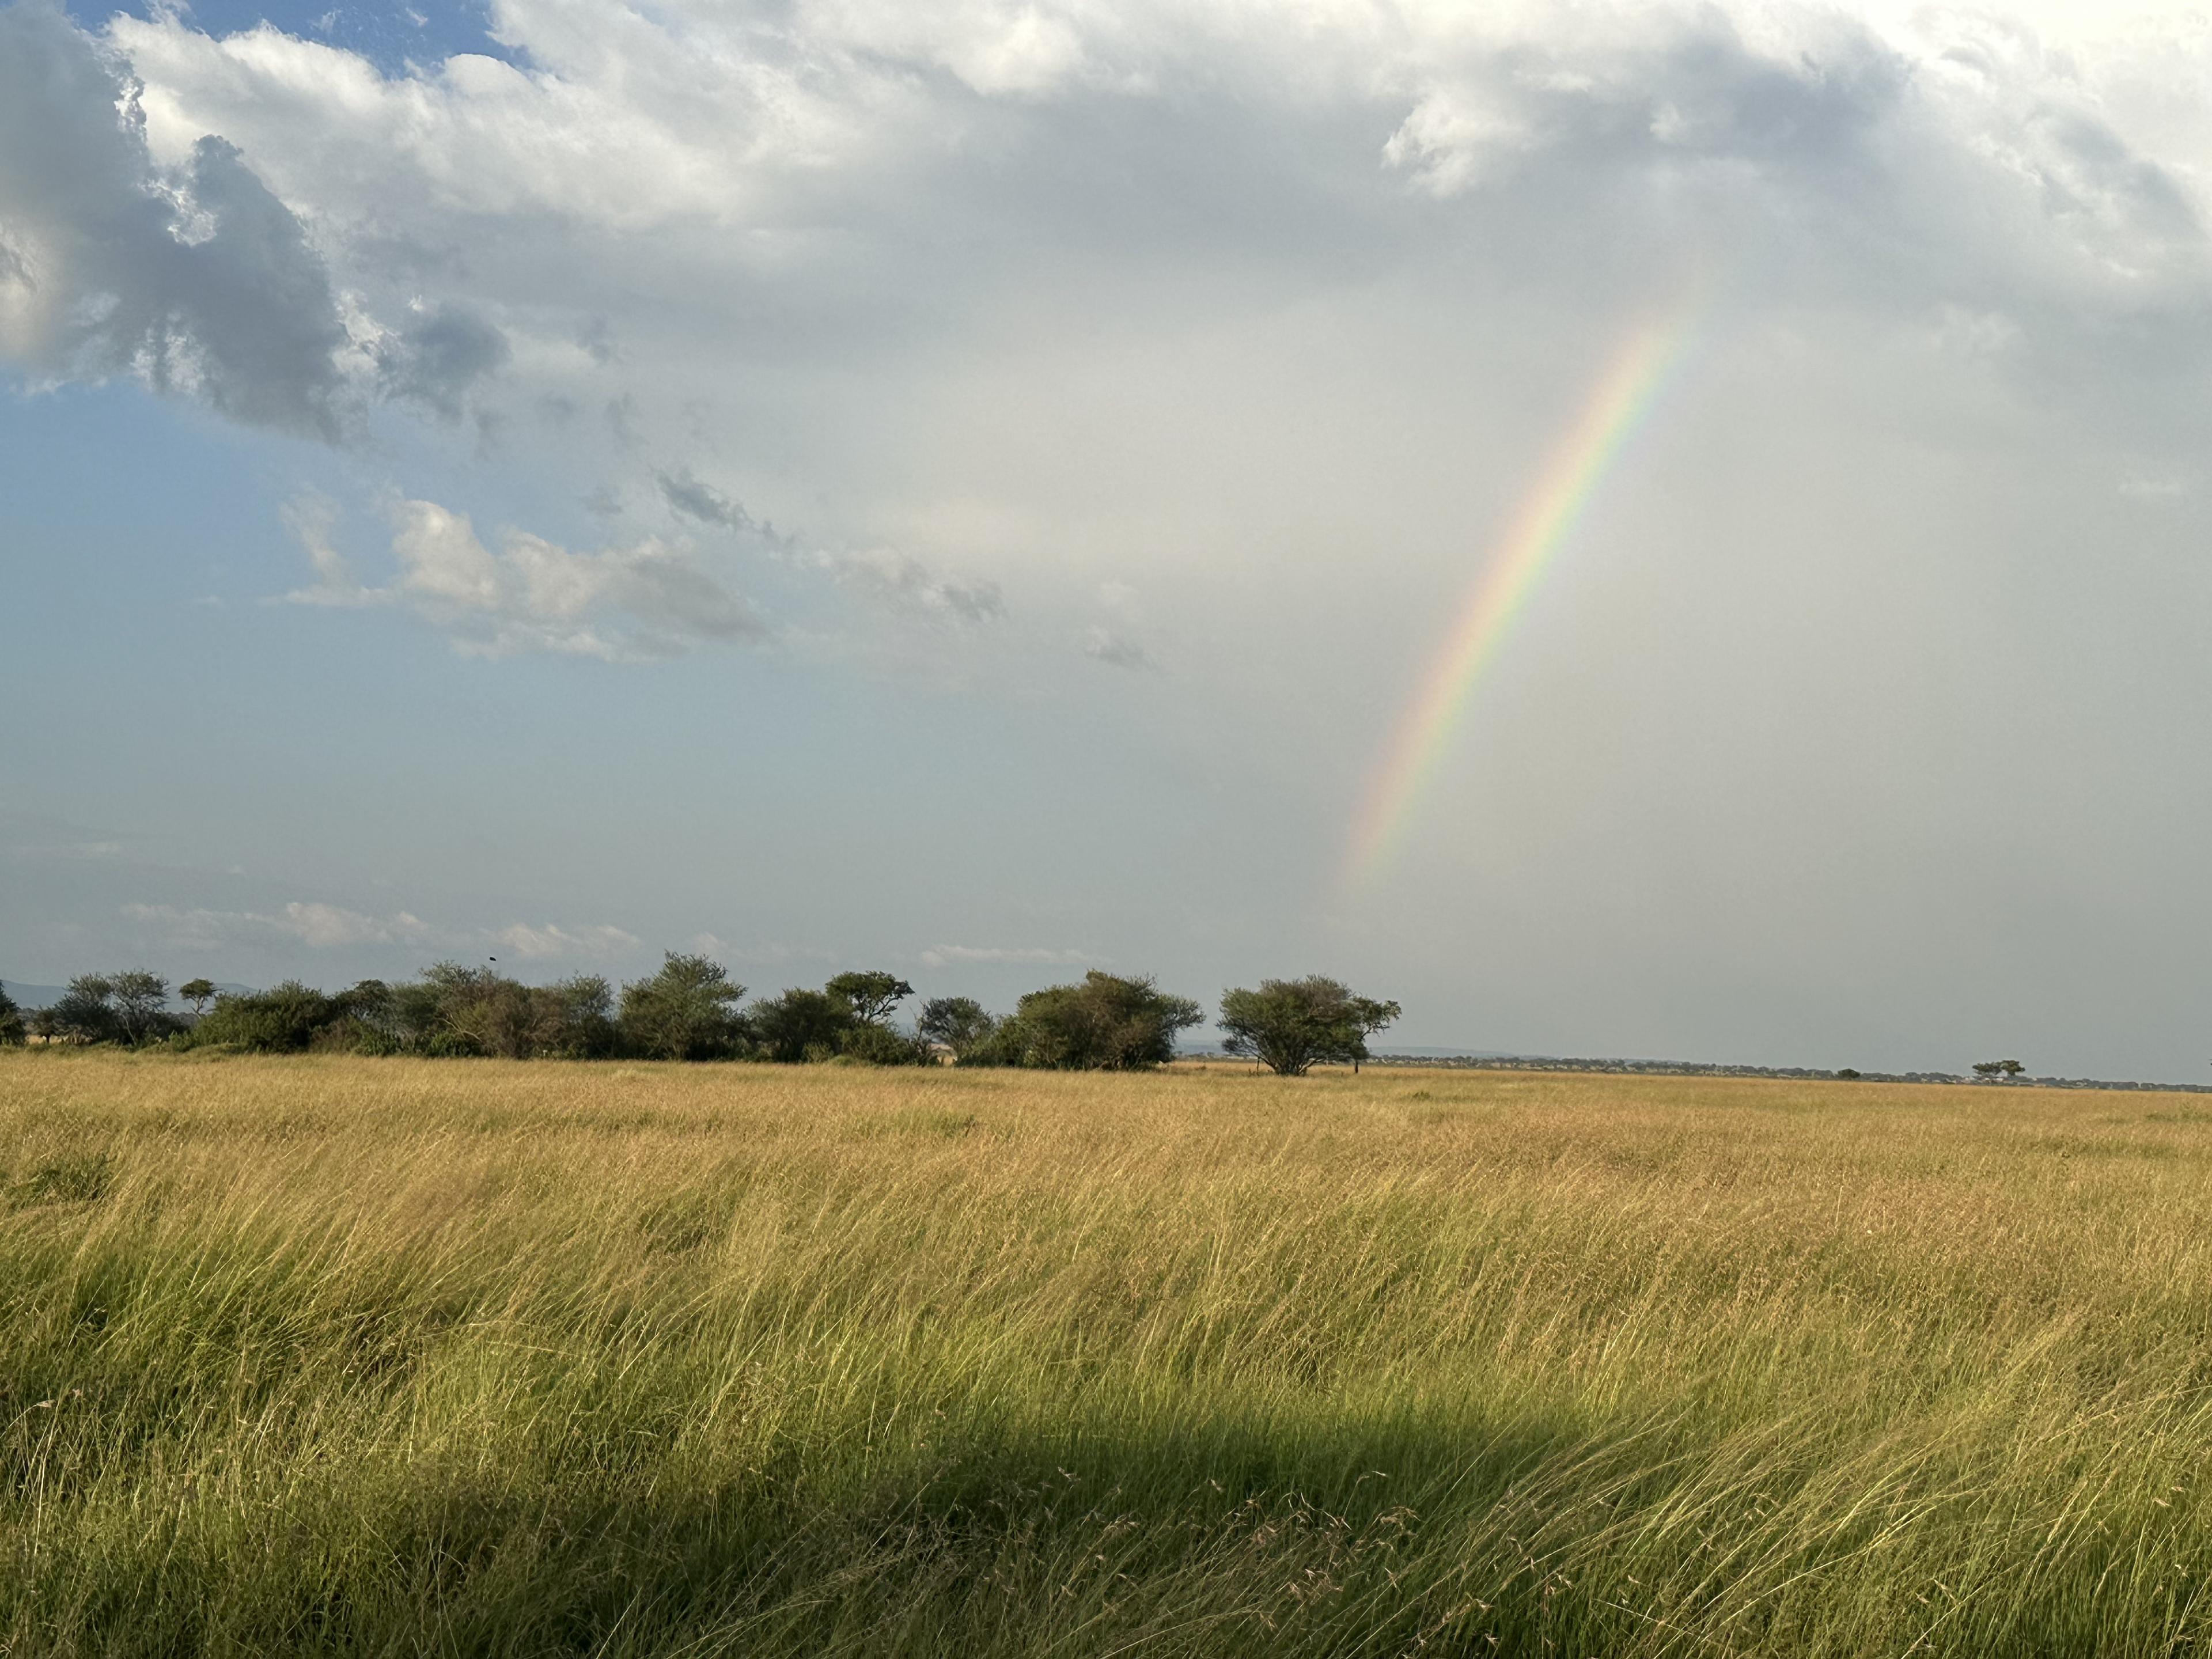 rainbow rising above the east african plains with grassy area in foreground and blue sky on left and light rainstorm on right